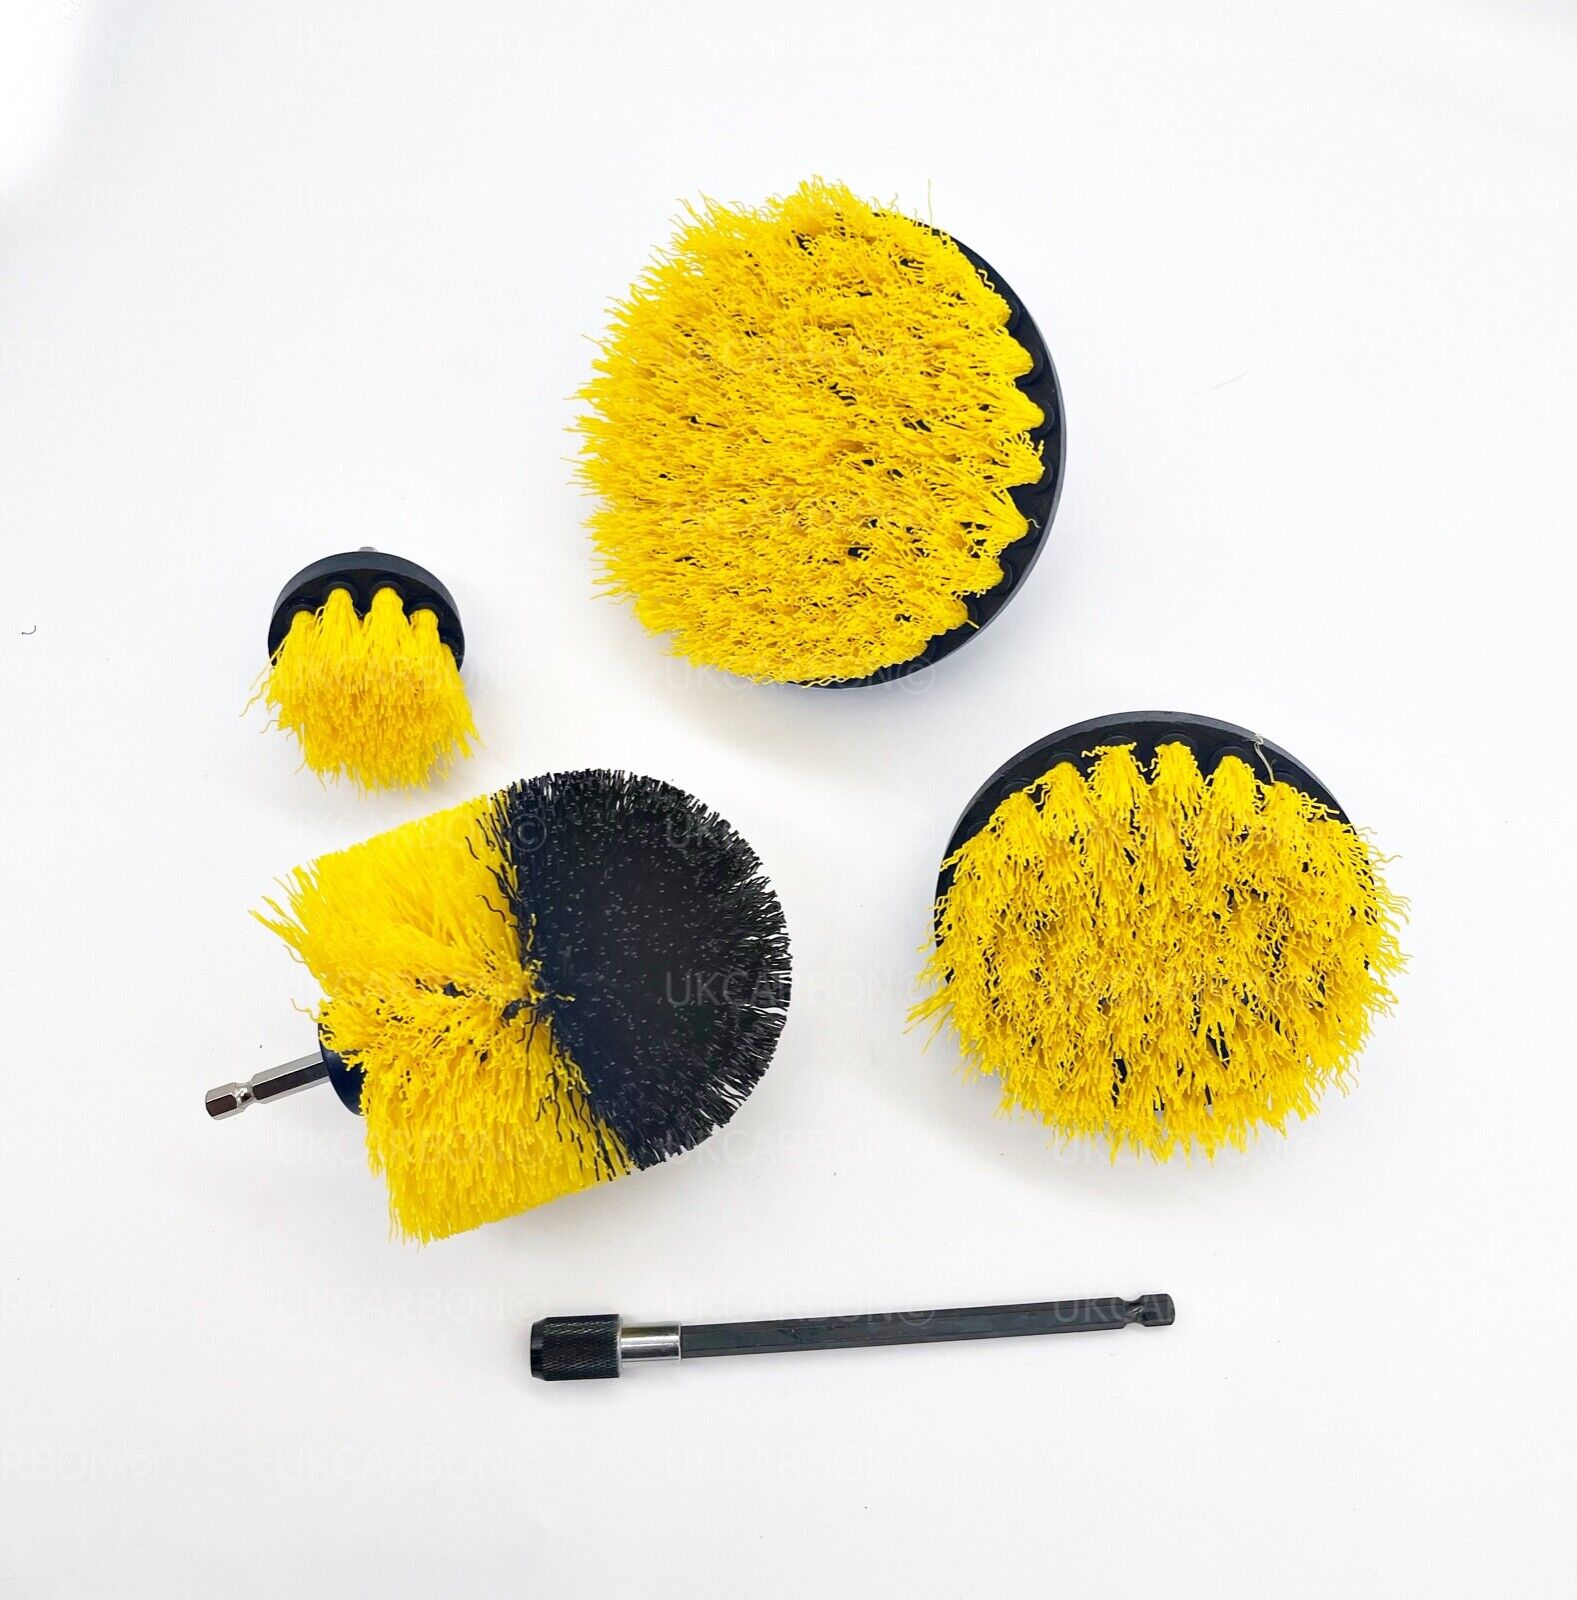 5x DRILL ATTACHMENT CLEANING BRUSH SET POWER SCRUB HOME CAR TILE BATHROOM YELLOW - UKCarbon